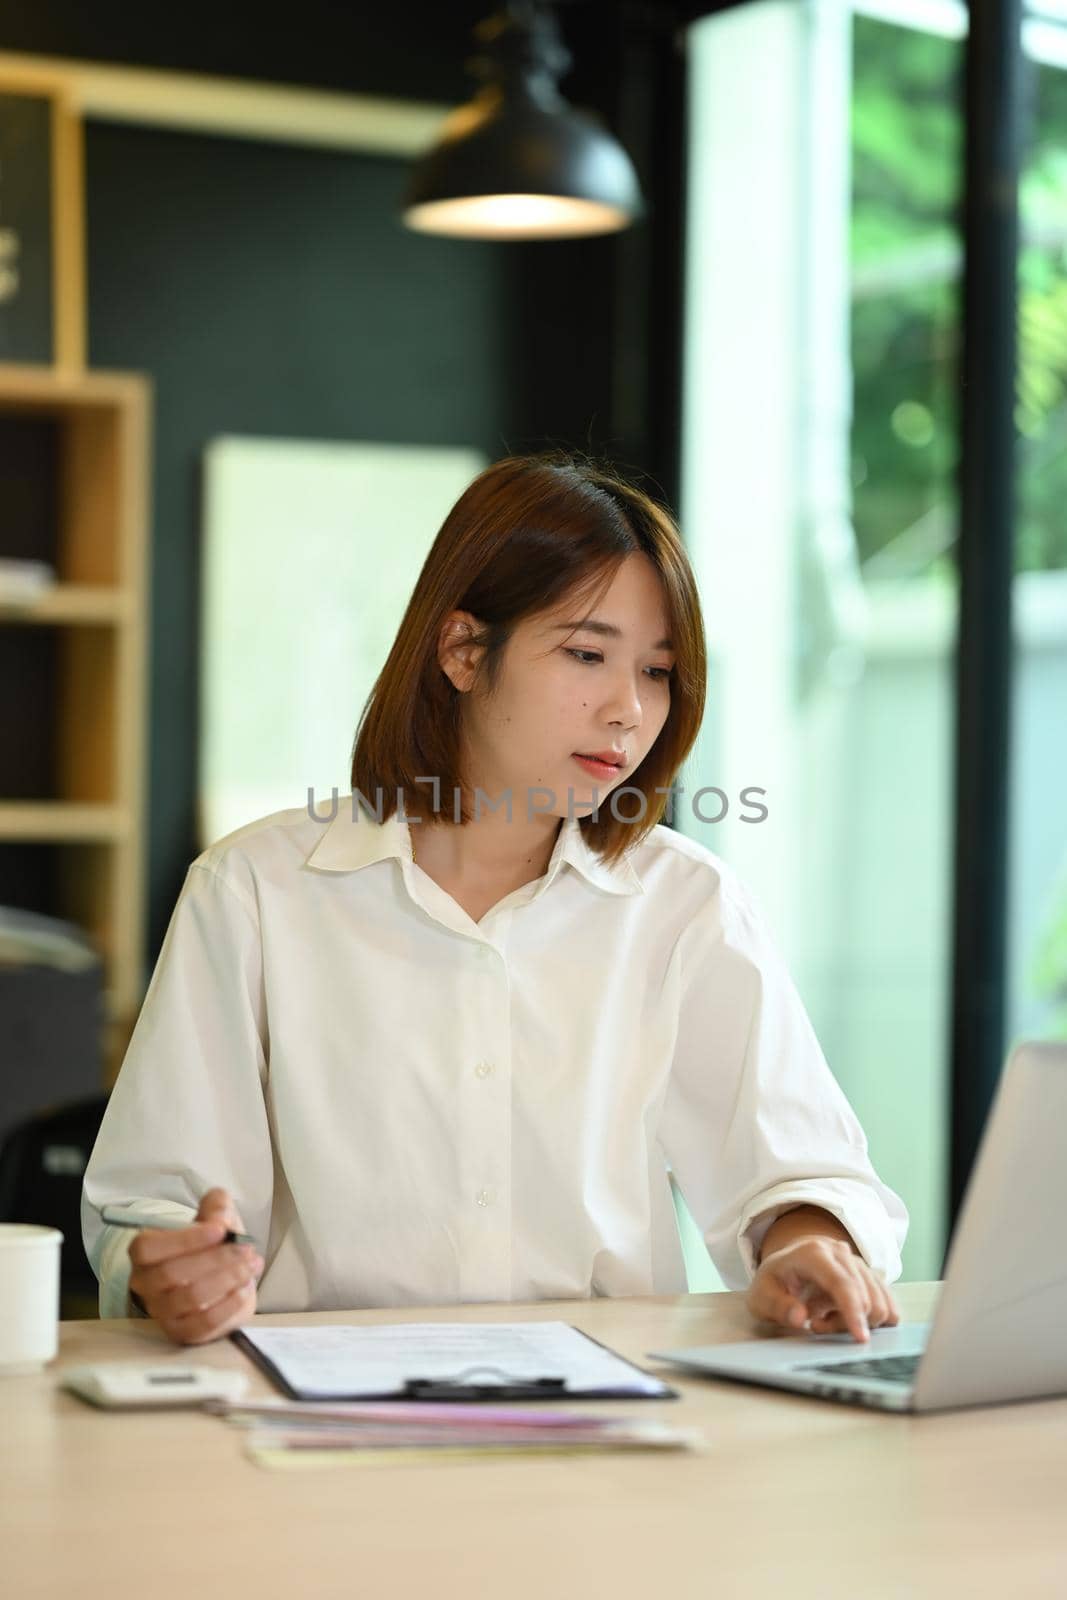 Professional businesswoman checking business email or checking online information on her laptop computer.